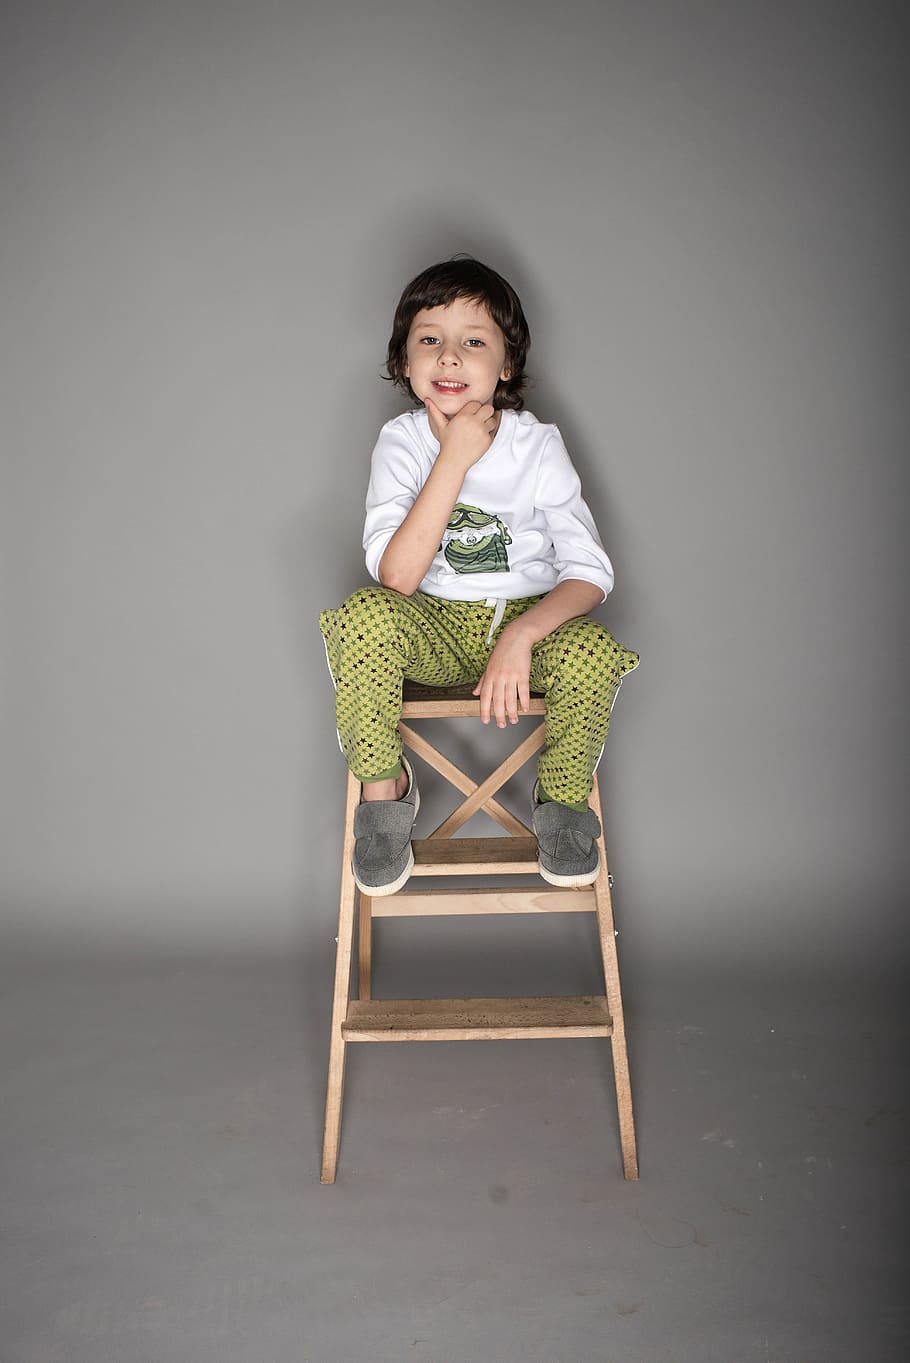 boy sitting on brown wooden chair, baby, cute, portrait, young